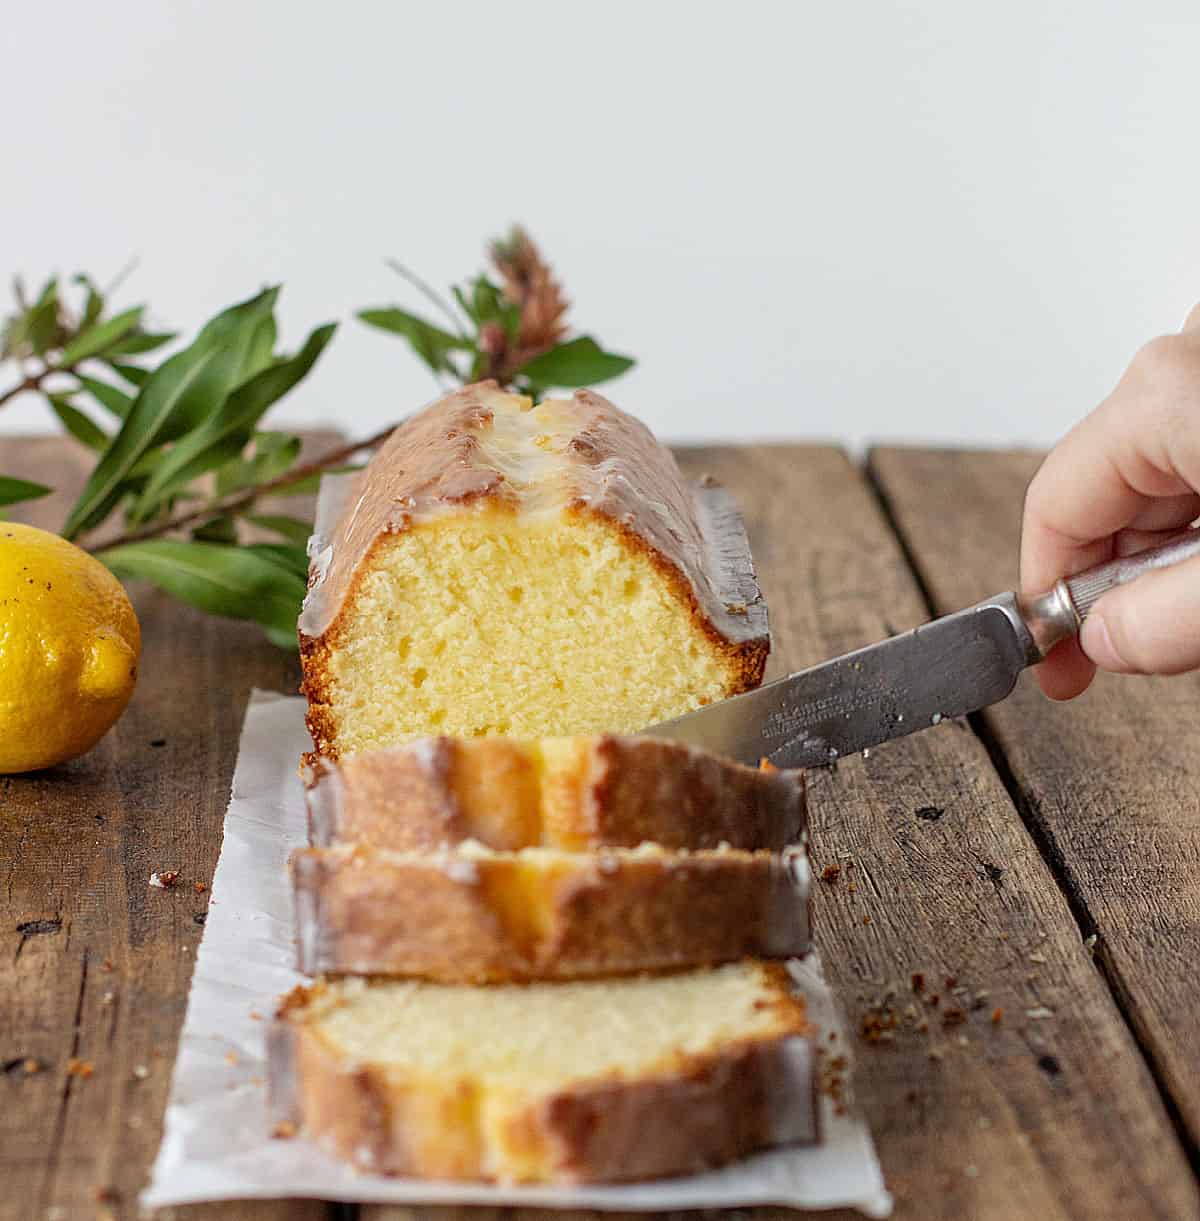 Cutting pound cake slices on a wooden board, lemon and leaves as props.